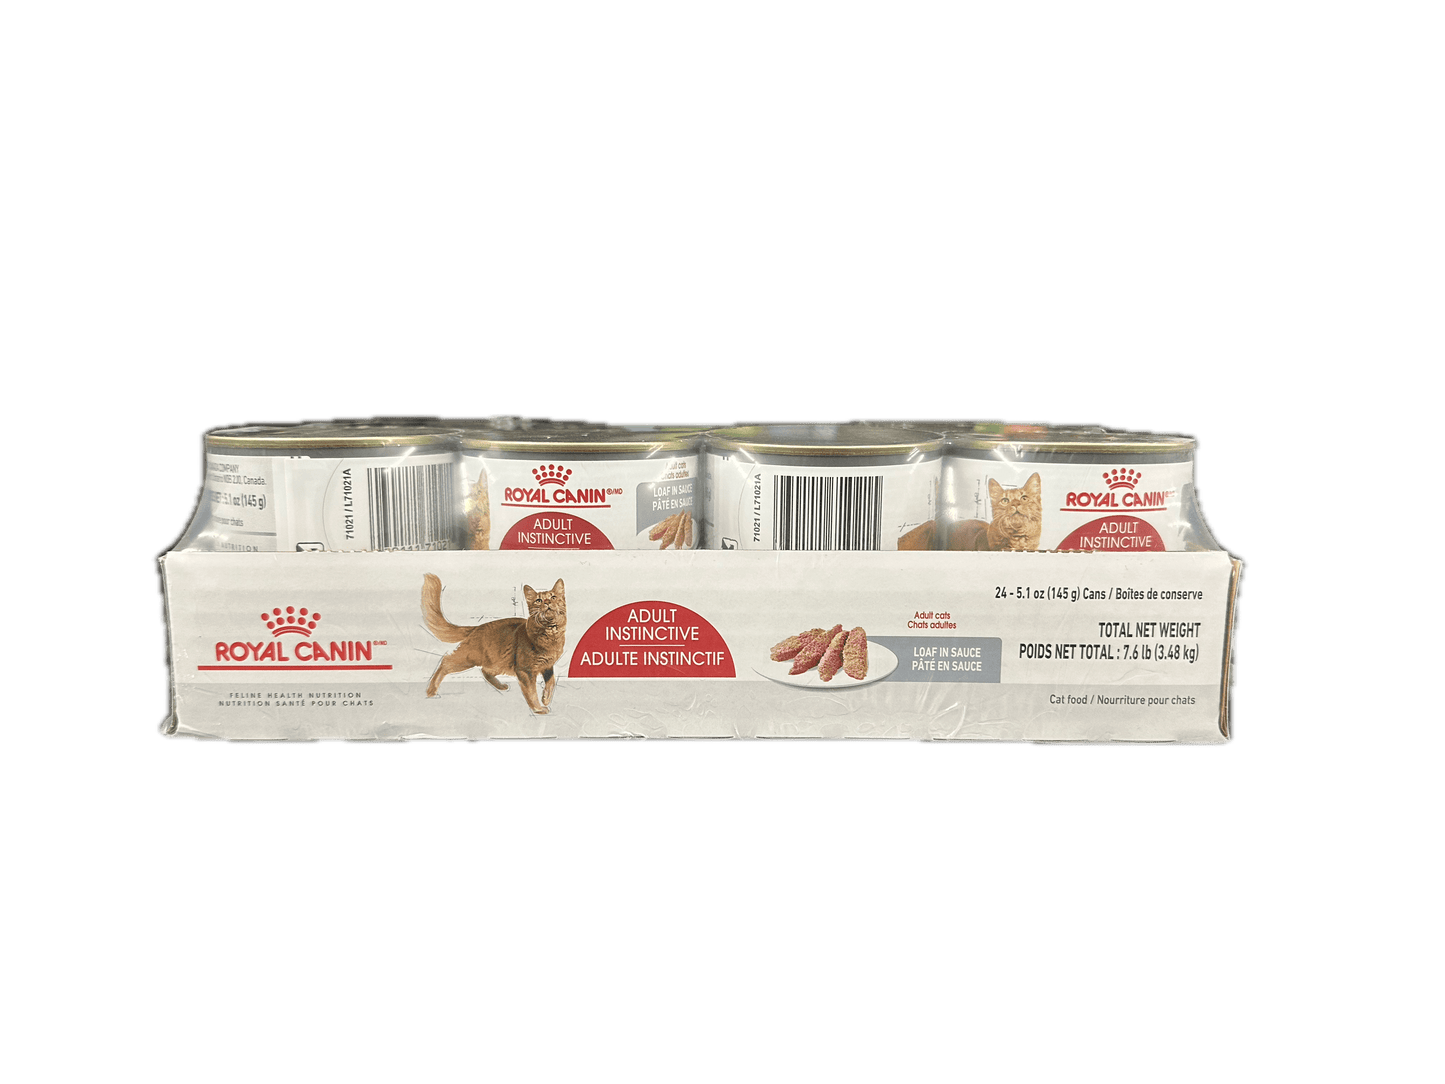 Royal Canin Canned Cat Food Adult Instinctive Loaf In Sauce - 145g / 24 Pack - Canned Cat Food - Royal Canin - PetMax Canada